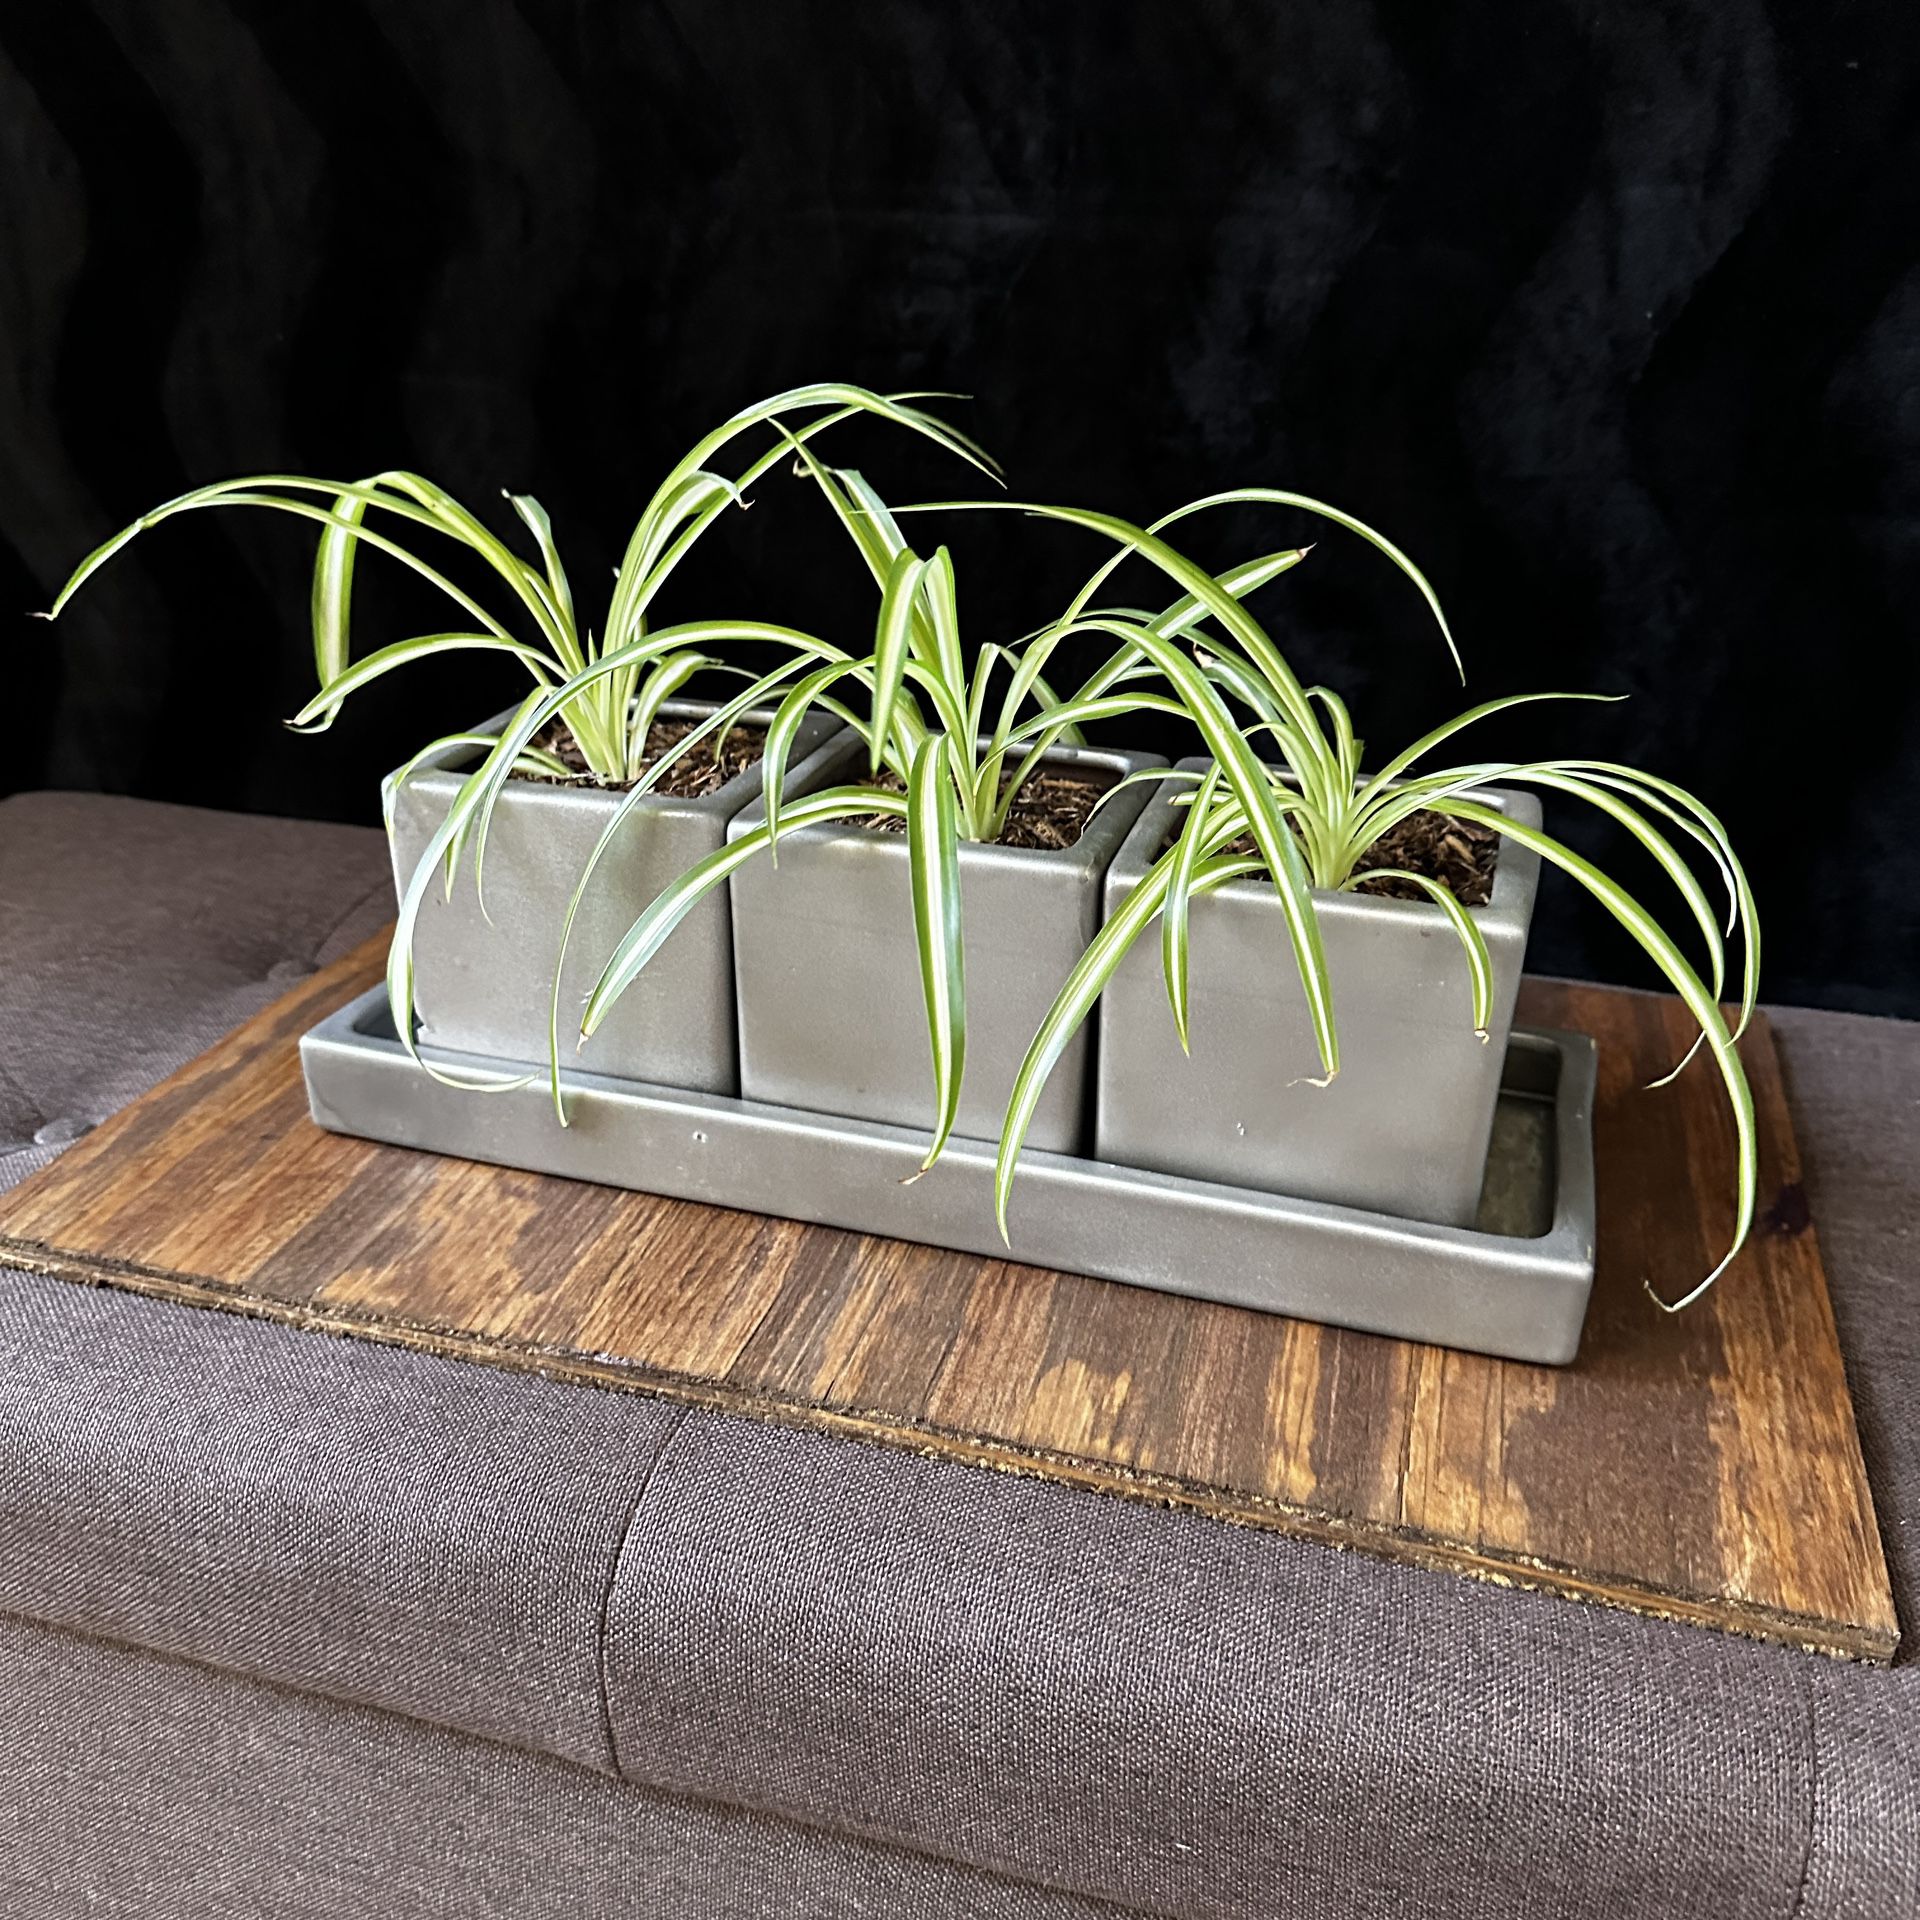 Spider Plants, 3 Pots & Water Tray